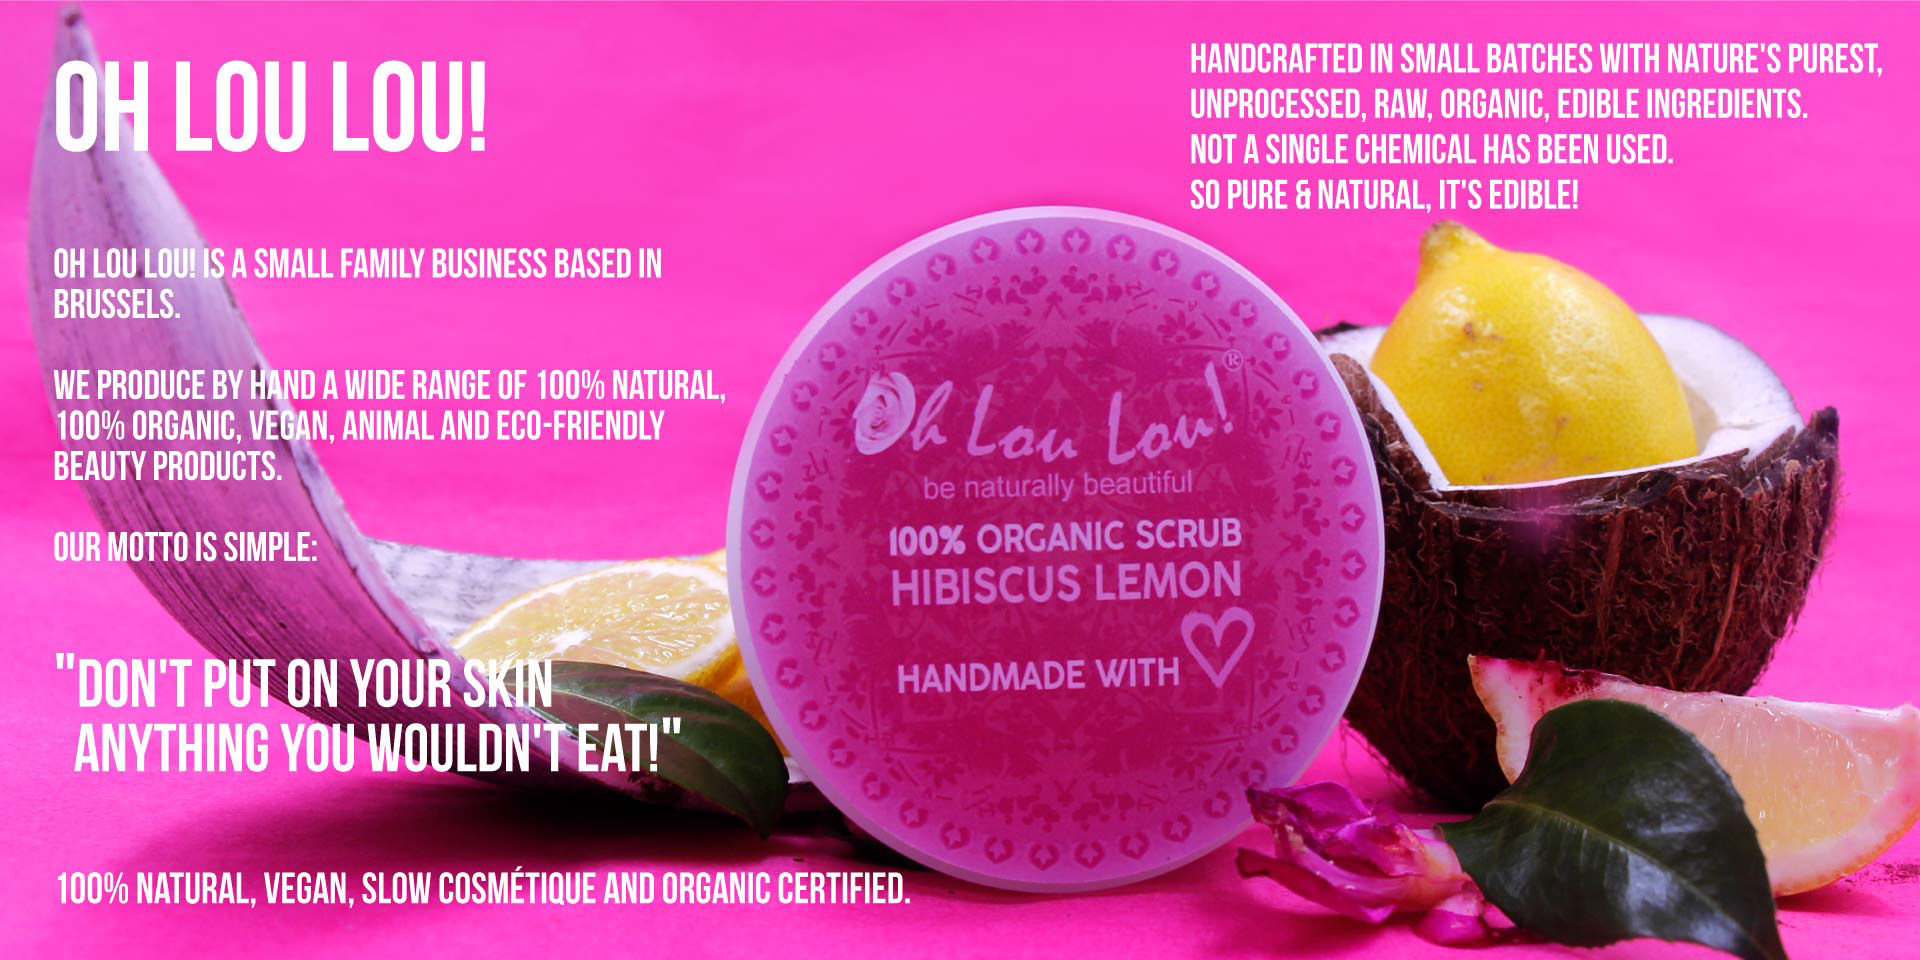 Oh Lou Lou! Organic, 100% Natural Handmade Products